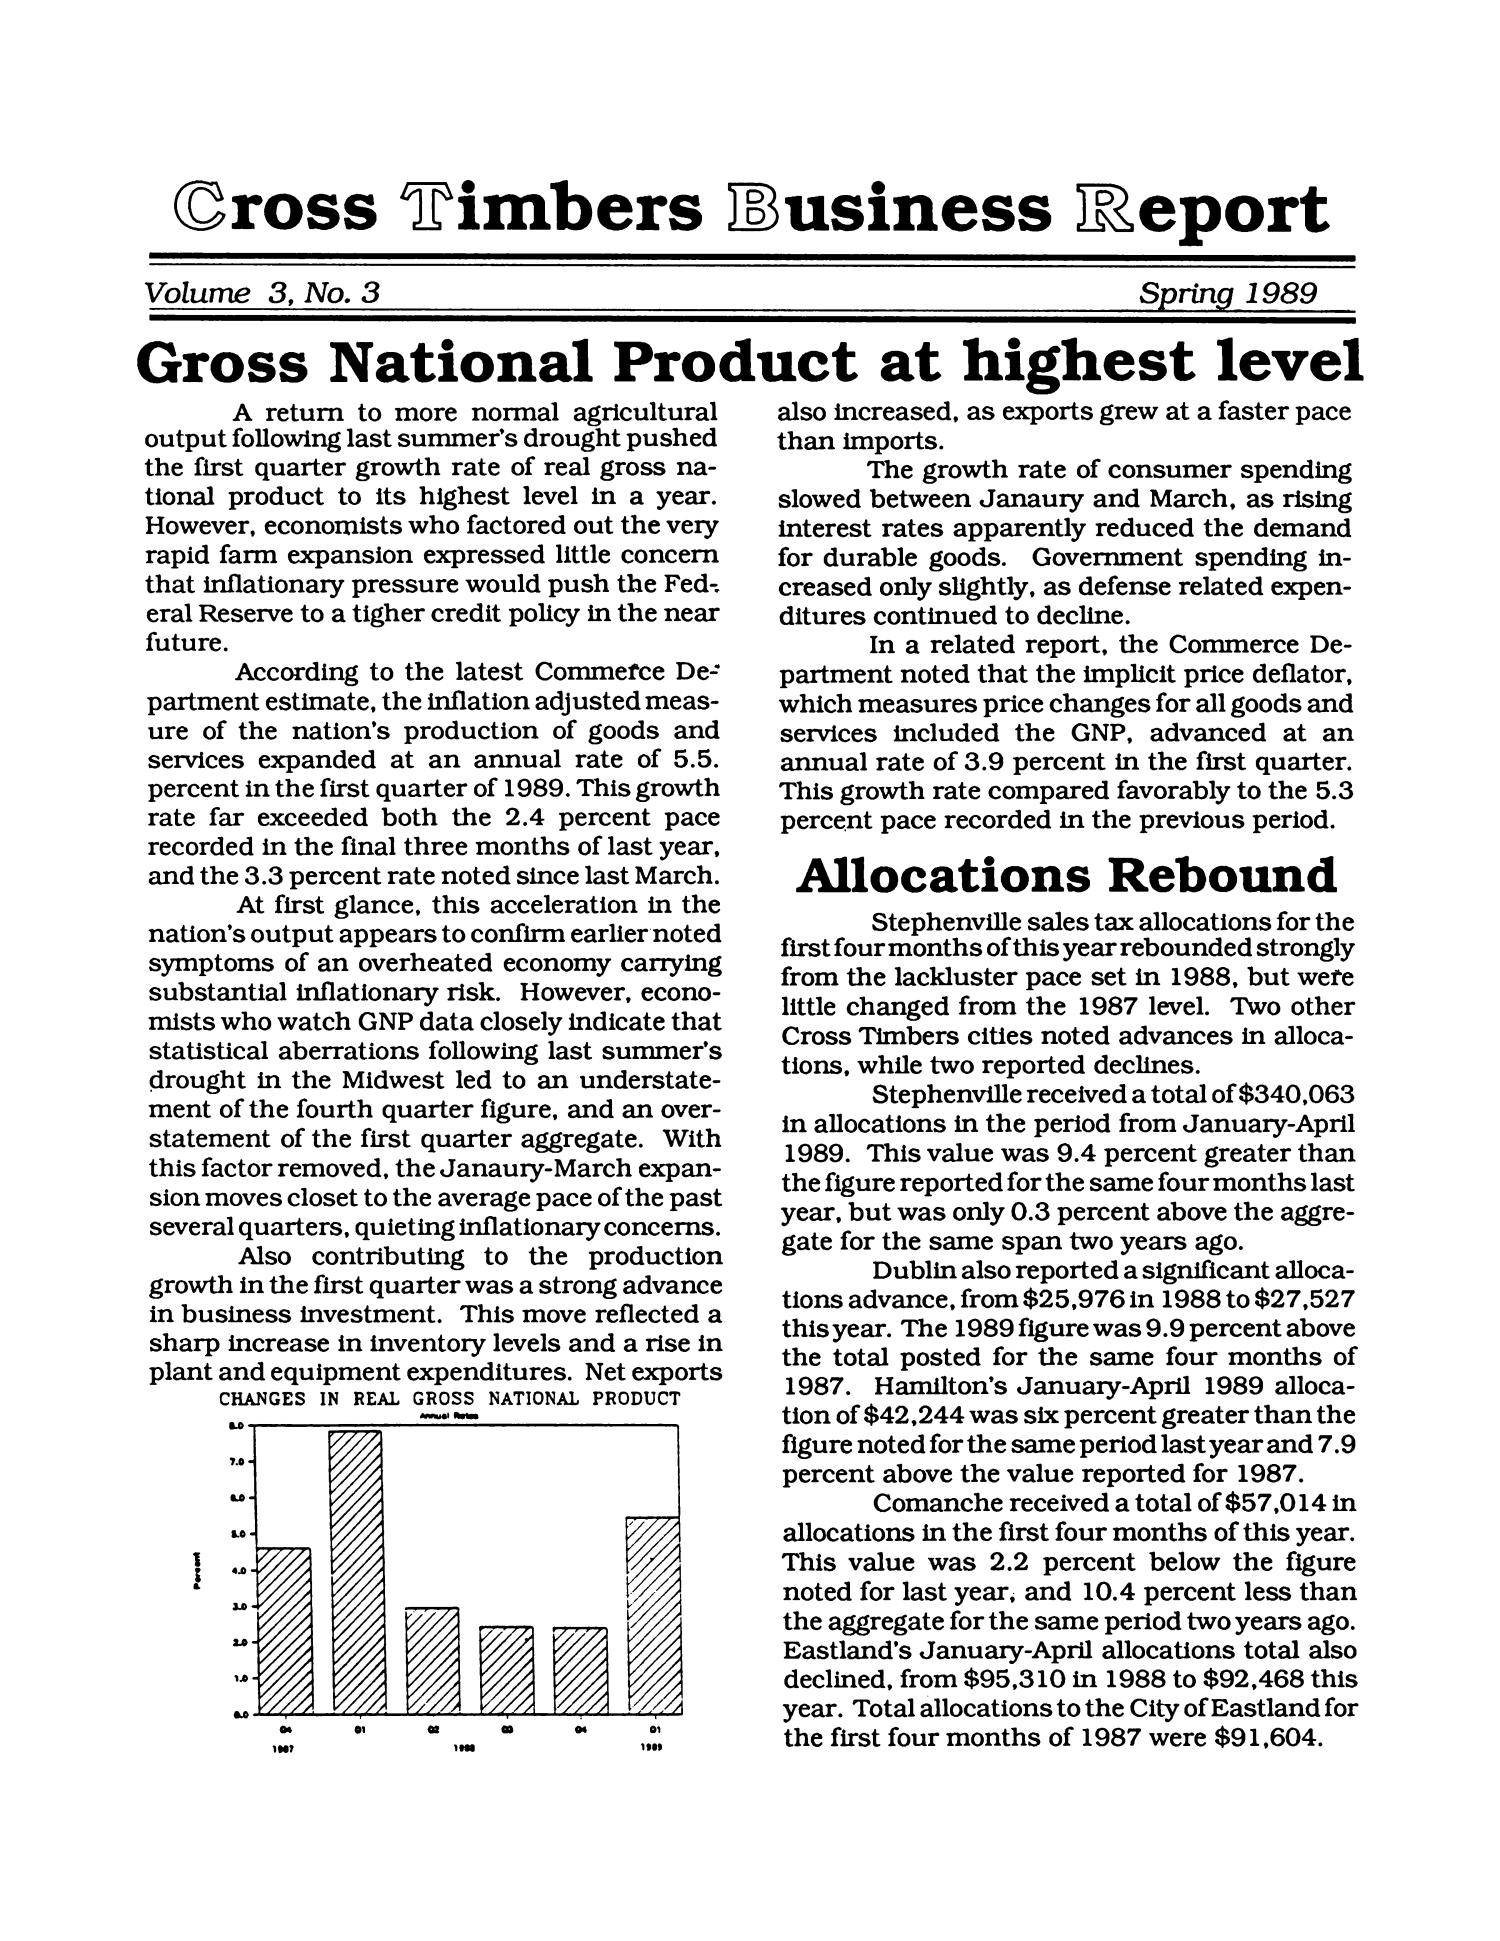 Cross Timbers Business Report, Volume 3, Number 3, Spring 1989
                                                
                                                    1
                                                